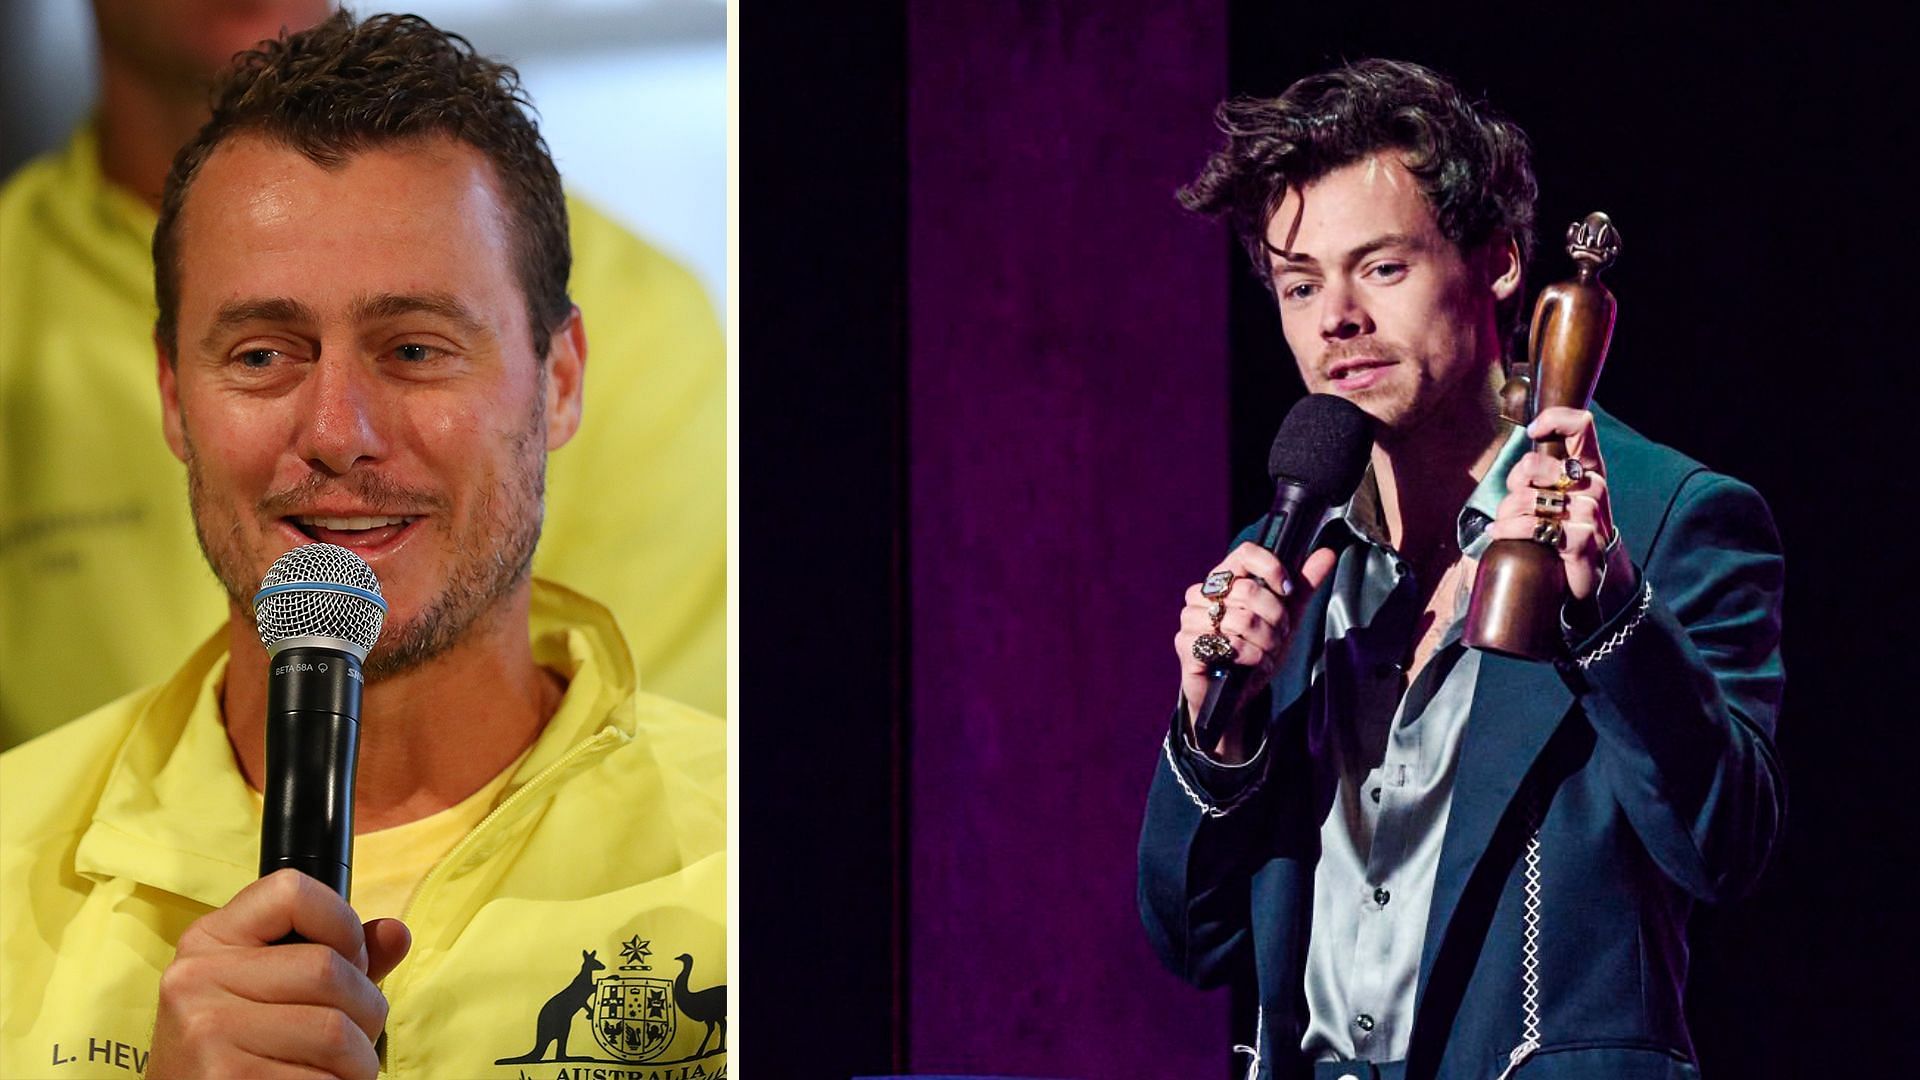 Lleyton Hewitt (L) and Harry Styles (R)